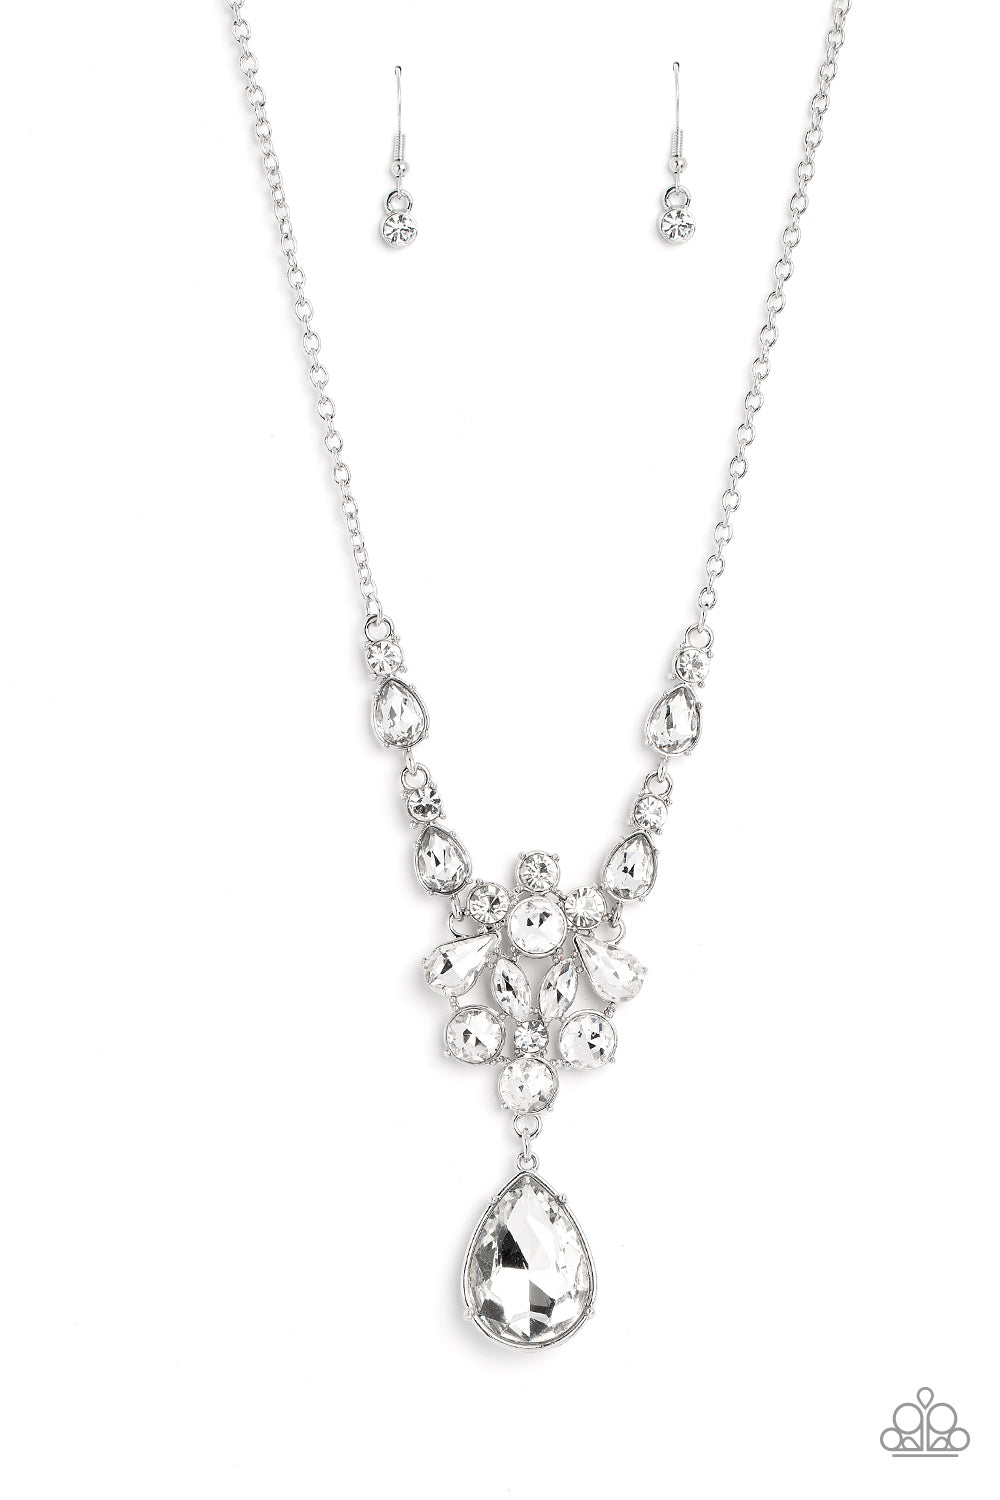 Paparazzi Accessories TWINKLE of an Eye - White Adorned with a dainty silver chain, a twinkling collection of white, reflective teardrops, rhinestones and marquise-cut gems glitter down the chest. Hanging at the bottom of the glittery collection, an overs